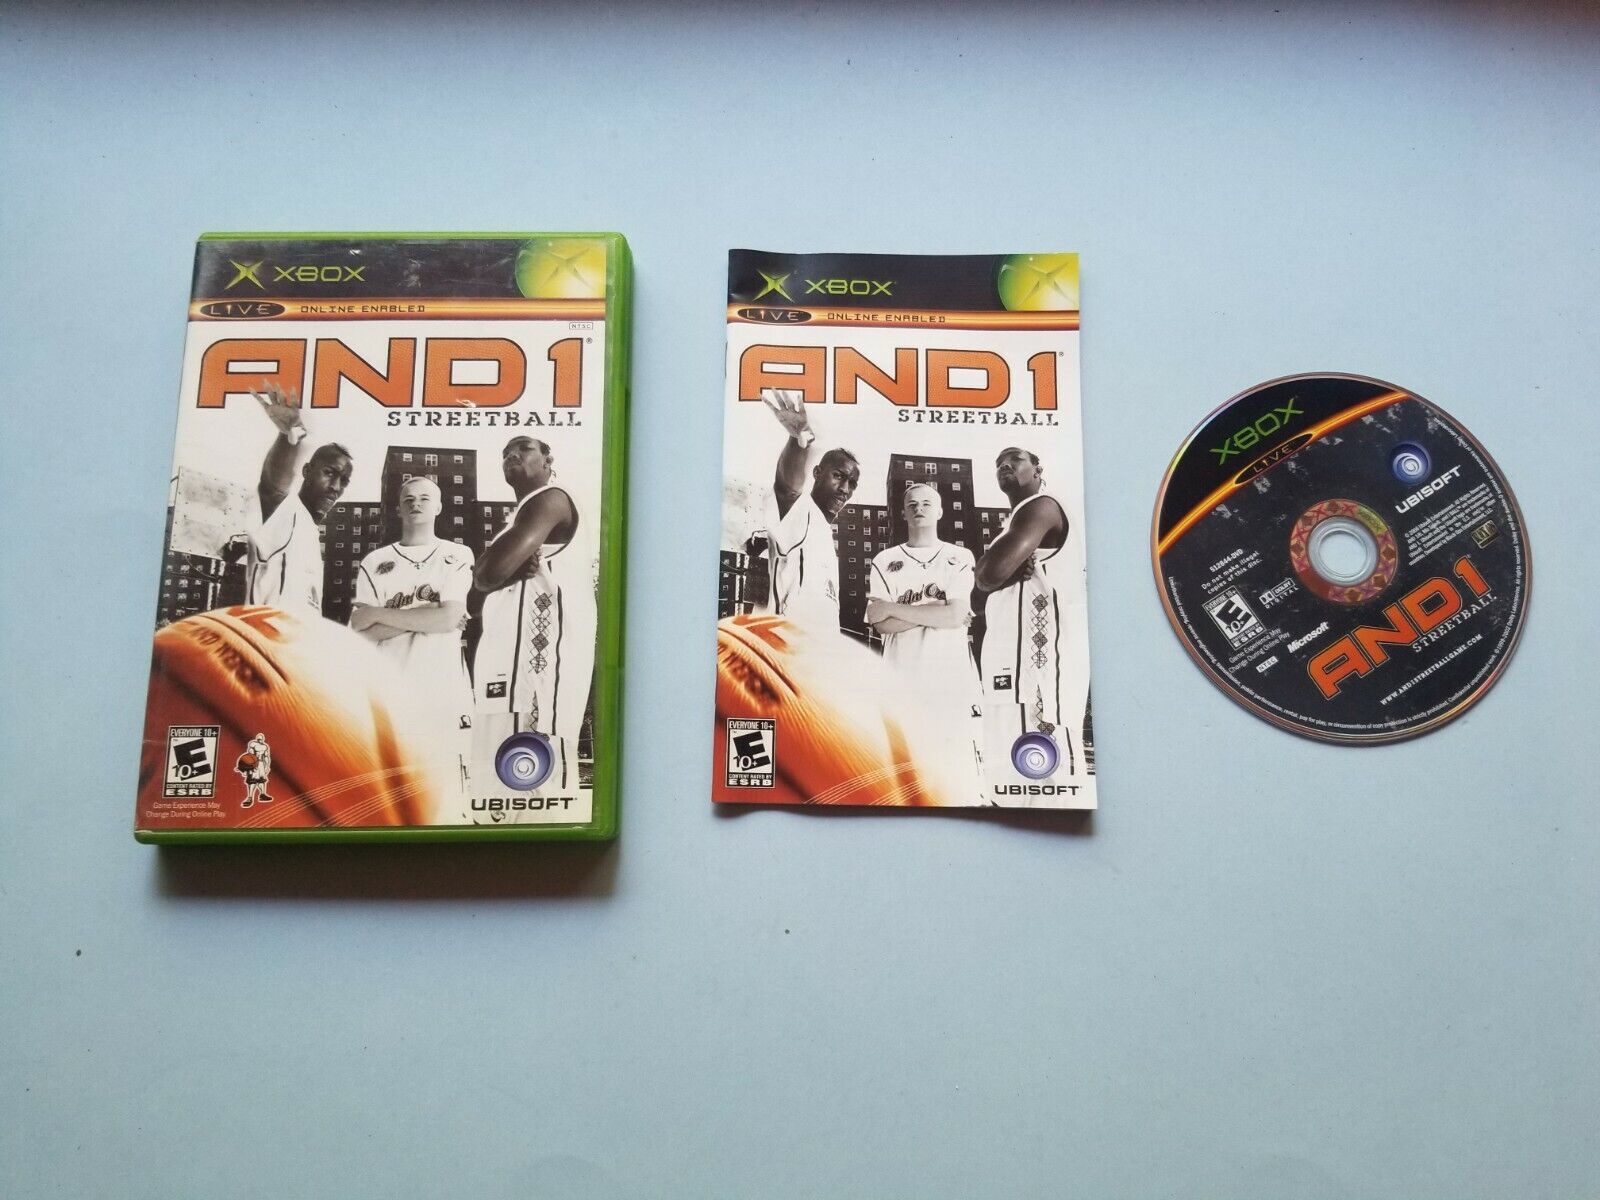 Primary image for And 1 Streetball (Microsoft Xbox, 2006)